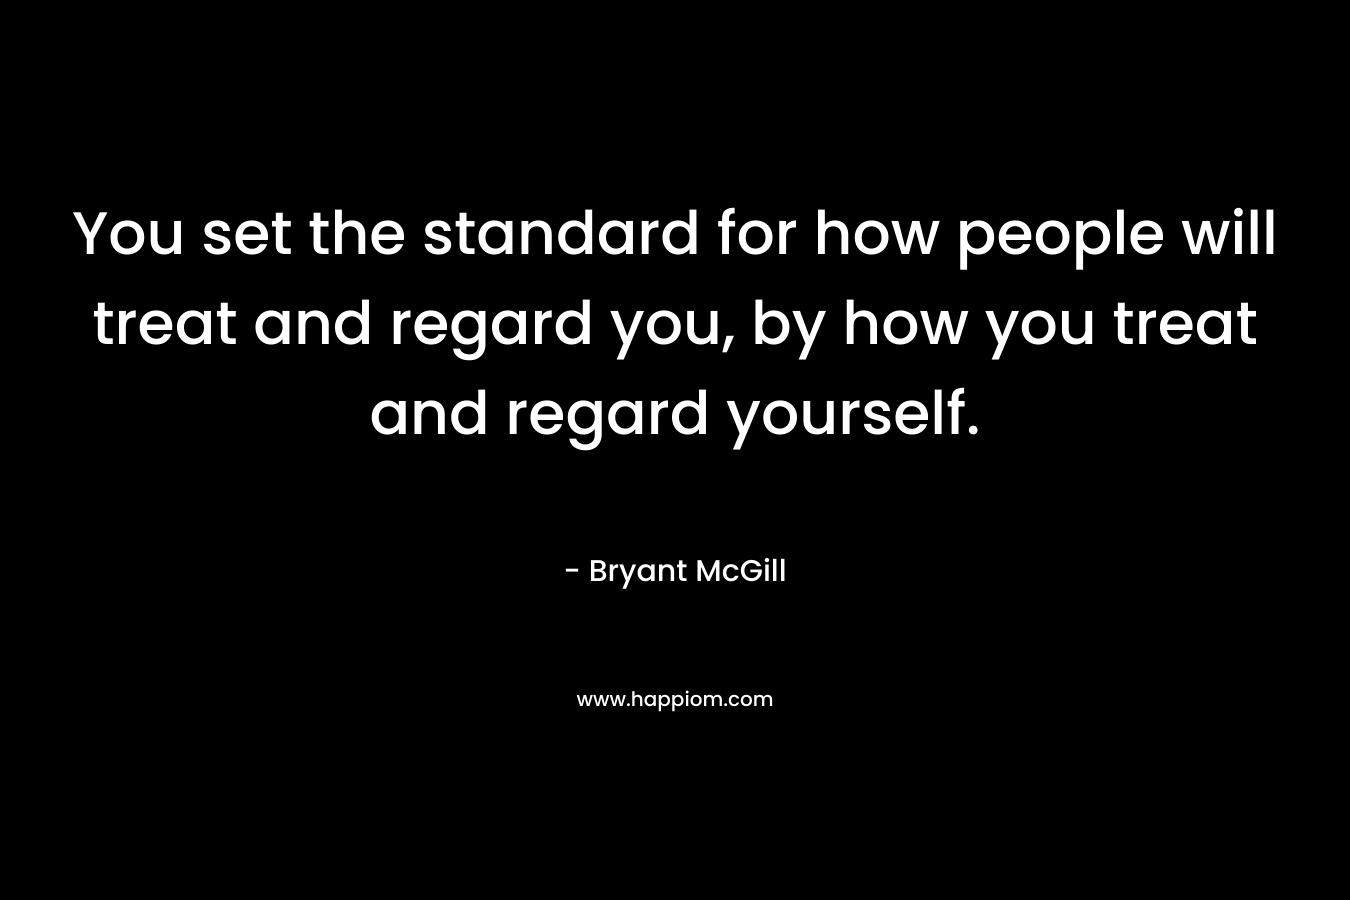 You set the standard for how people will treat and regard you, by how you treat and regard yourself.